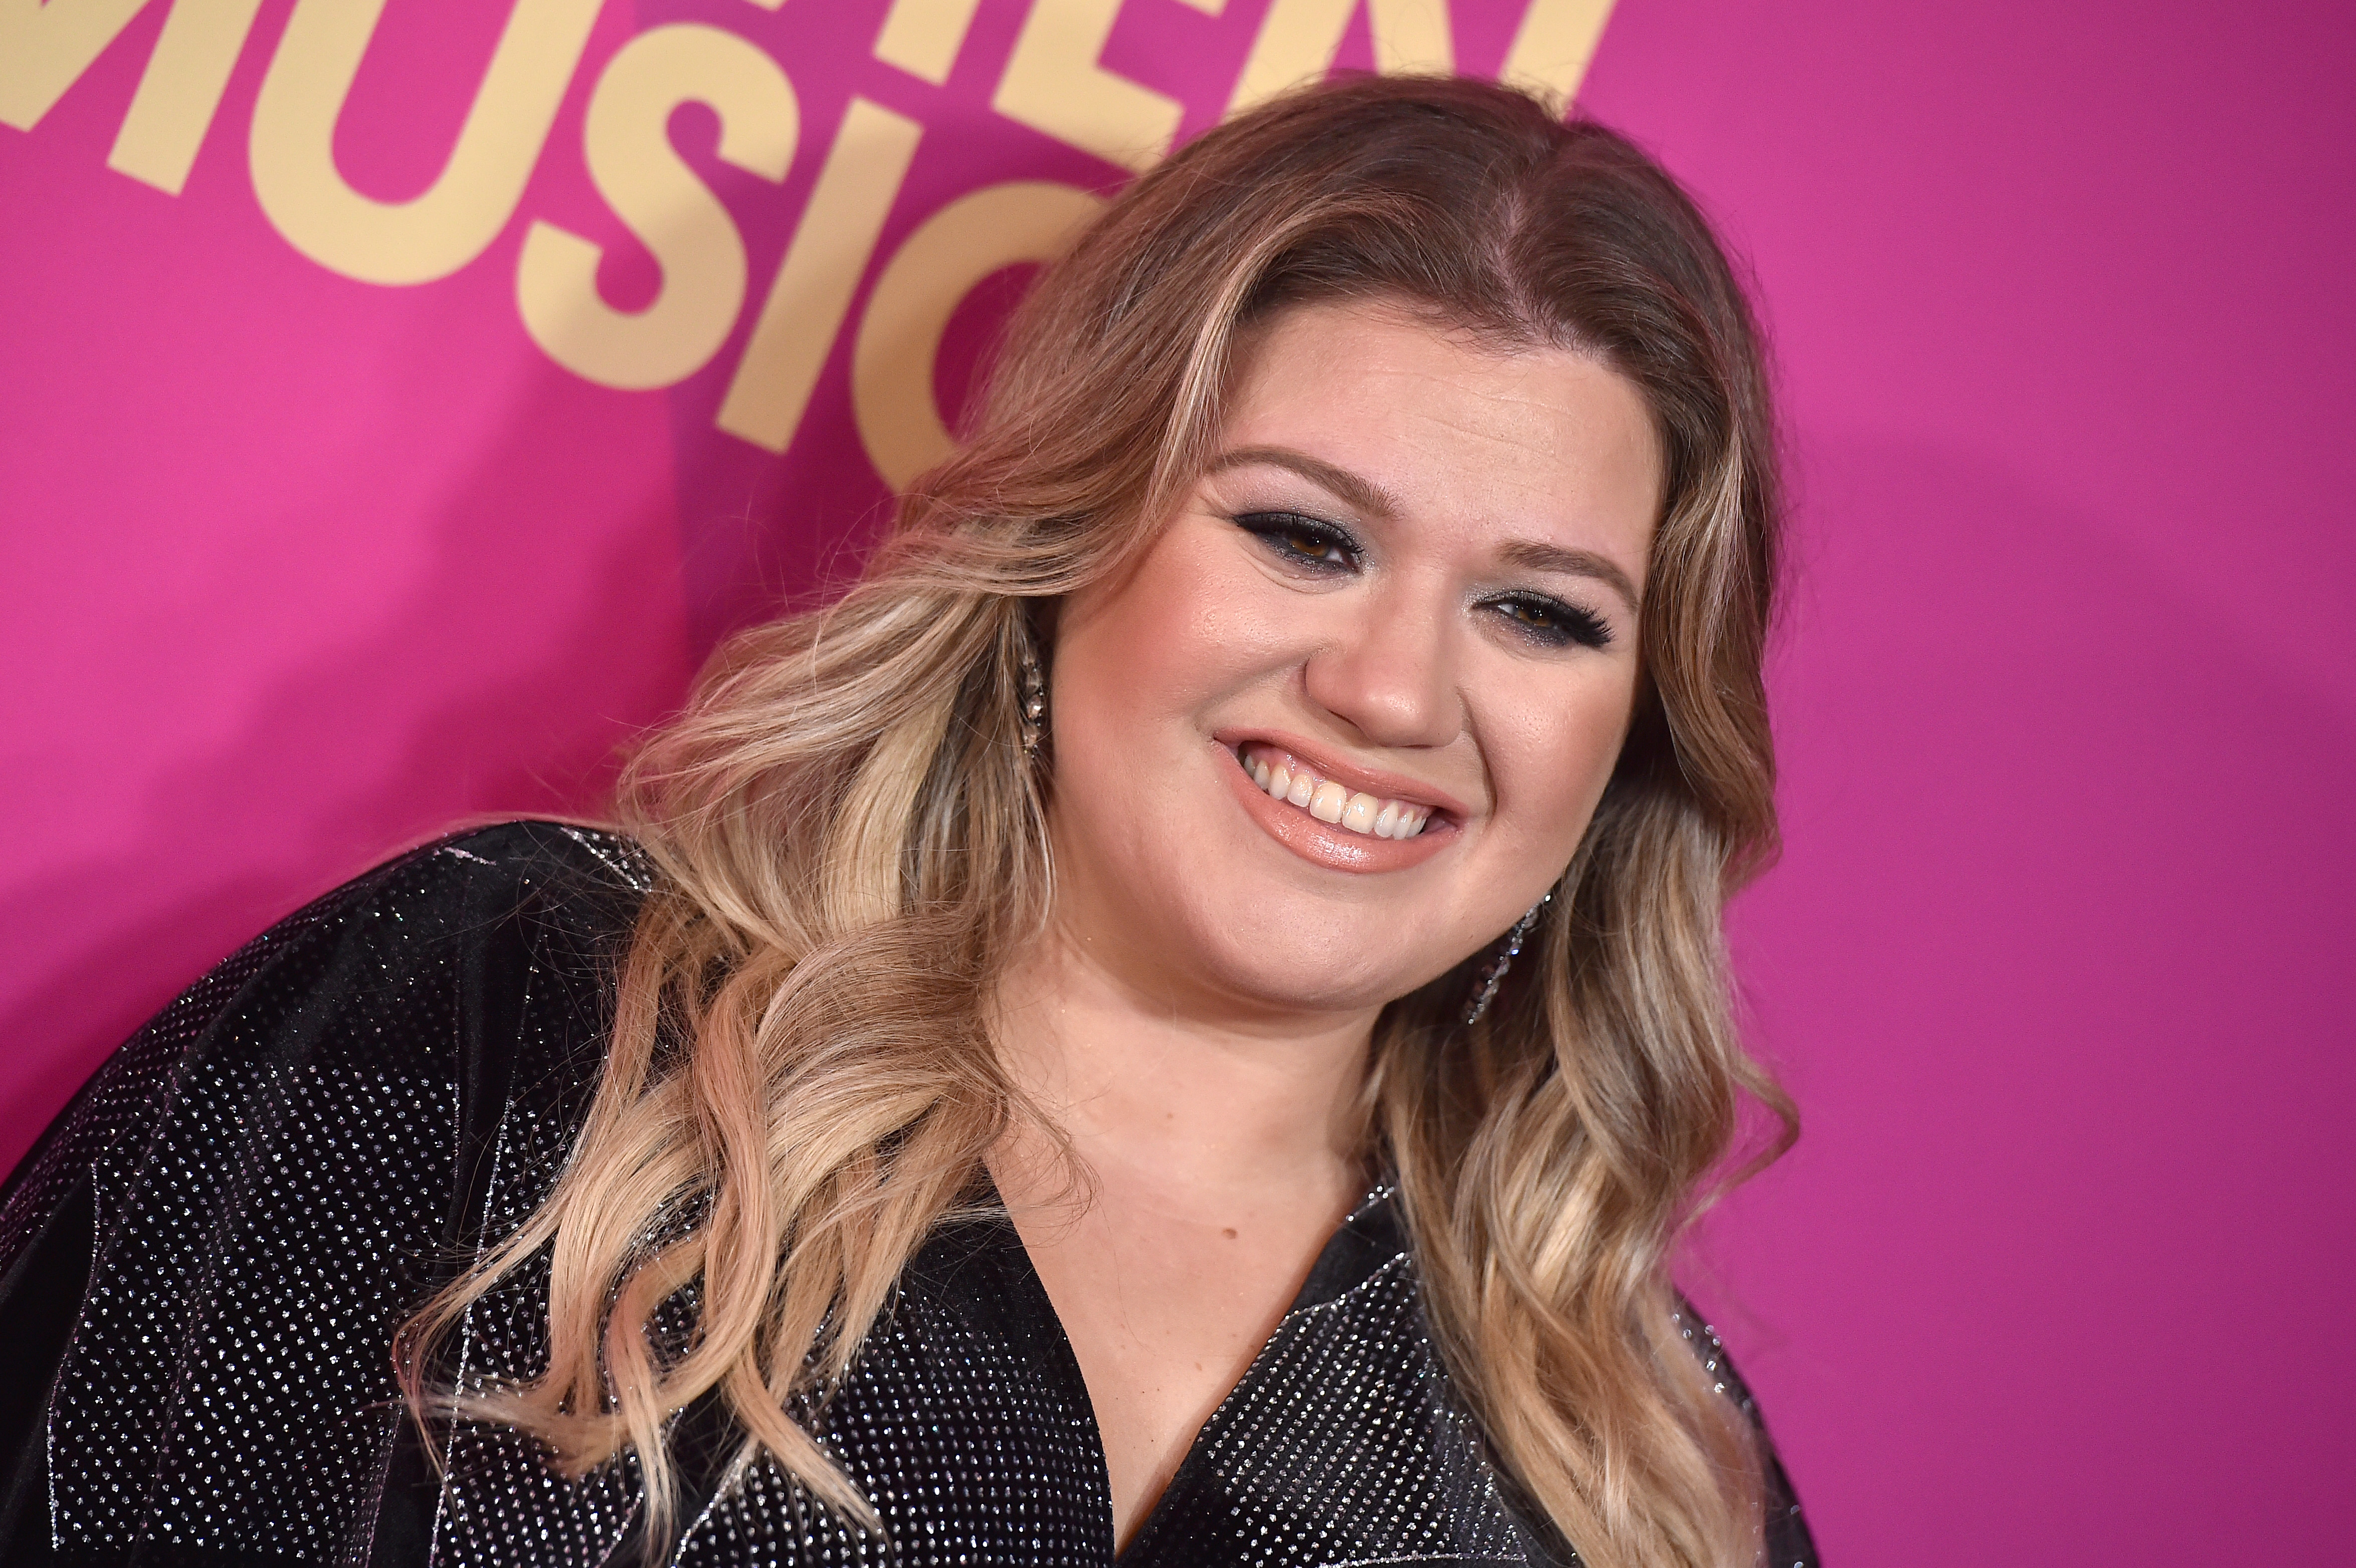 Kelly Clarkson Transformation Photos: Then and Now